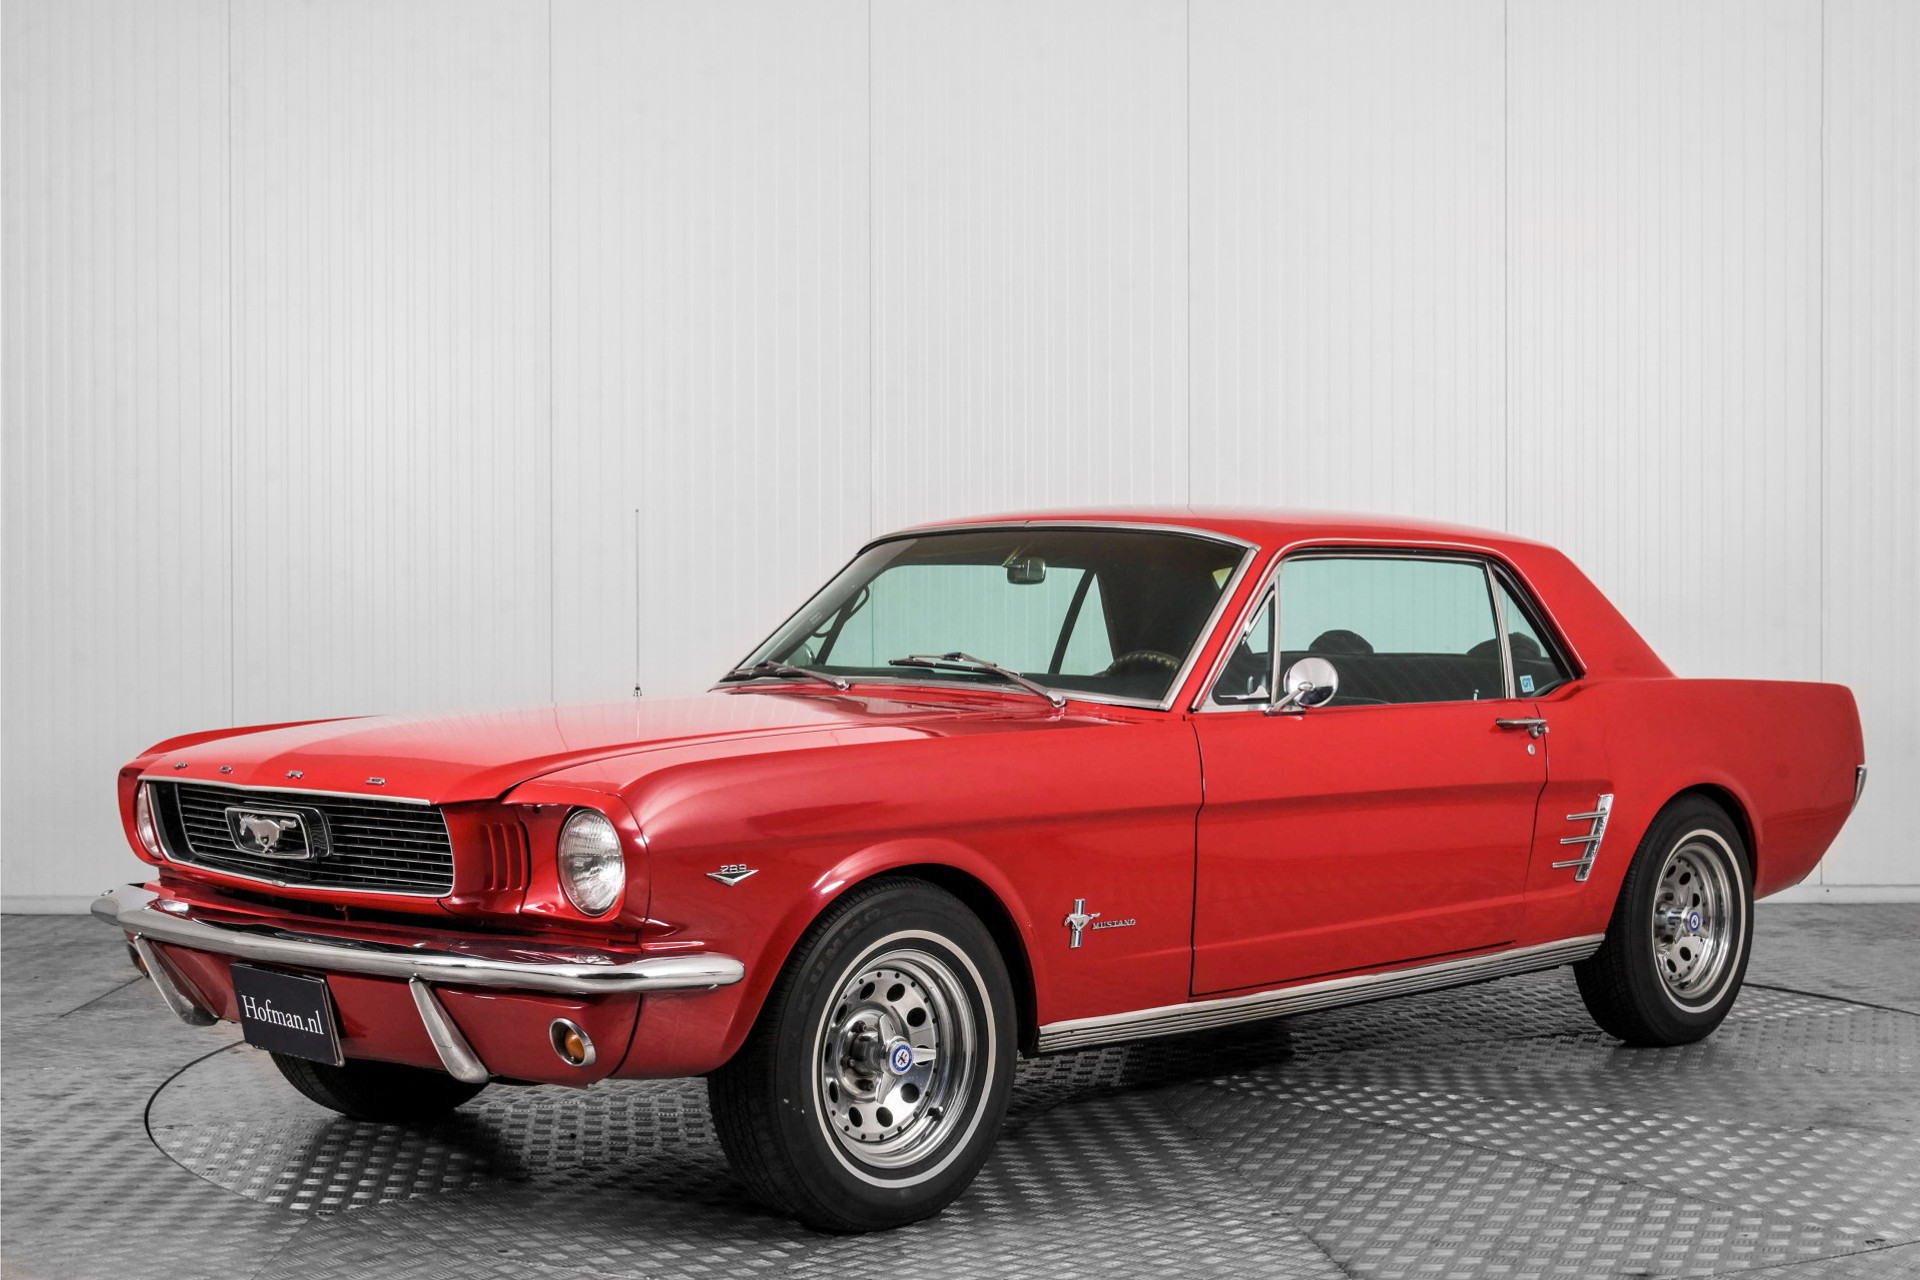 Ford Mustang 289 V8 automatic Foto 1